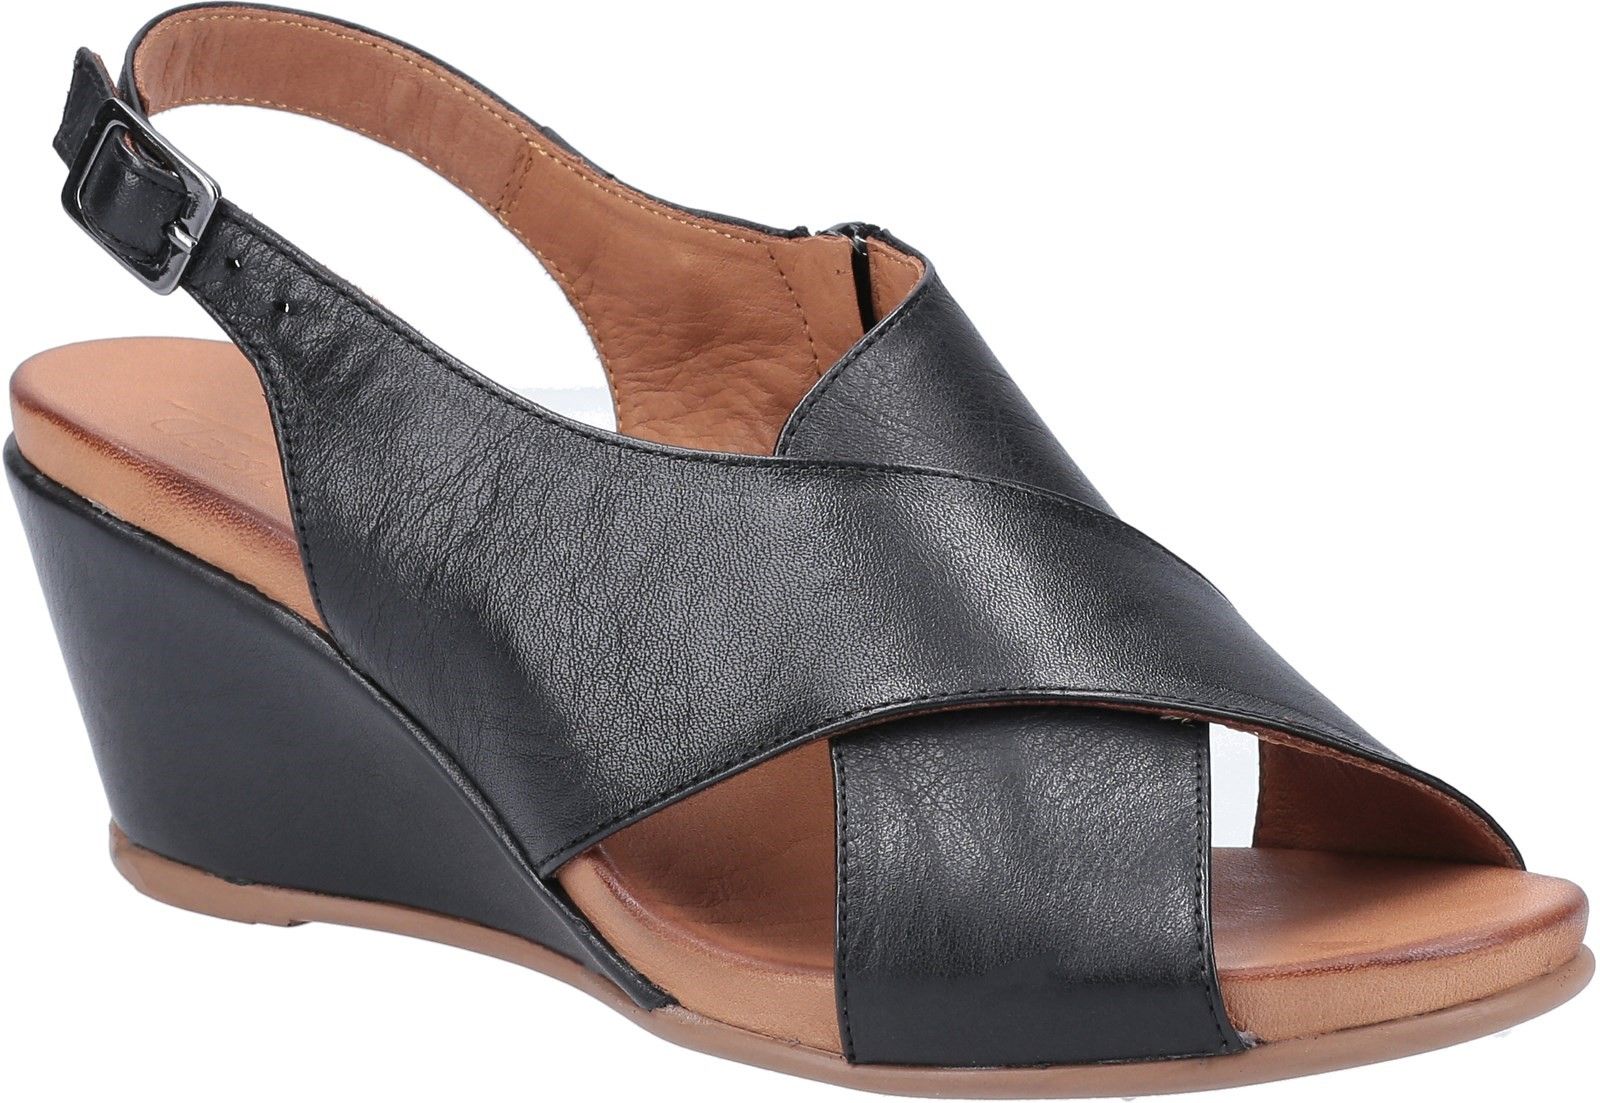 Riva Penne is a womens stylish and versatile wedge heeled slingback sandal with soft leather uppers in a simple crossover design, leather lining and buckle fastening at ankle for fit adjustment.